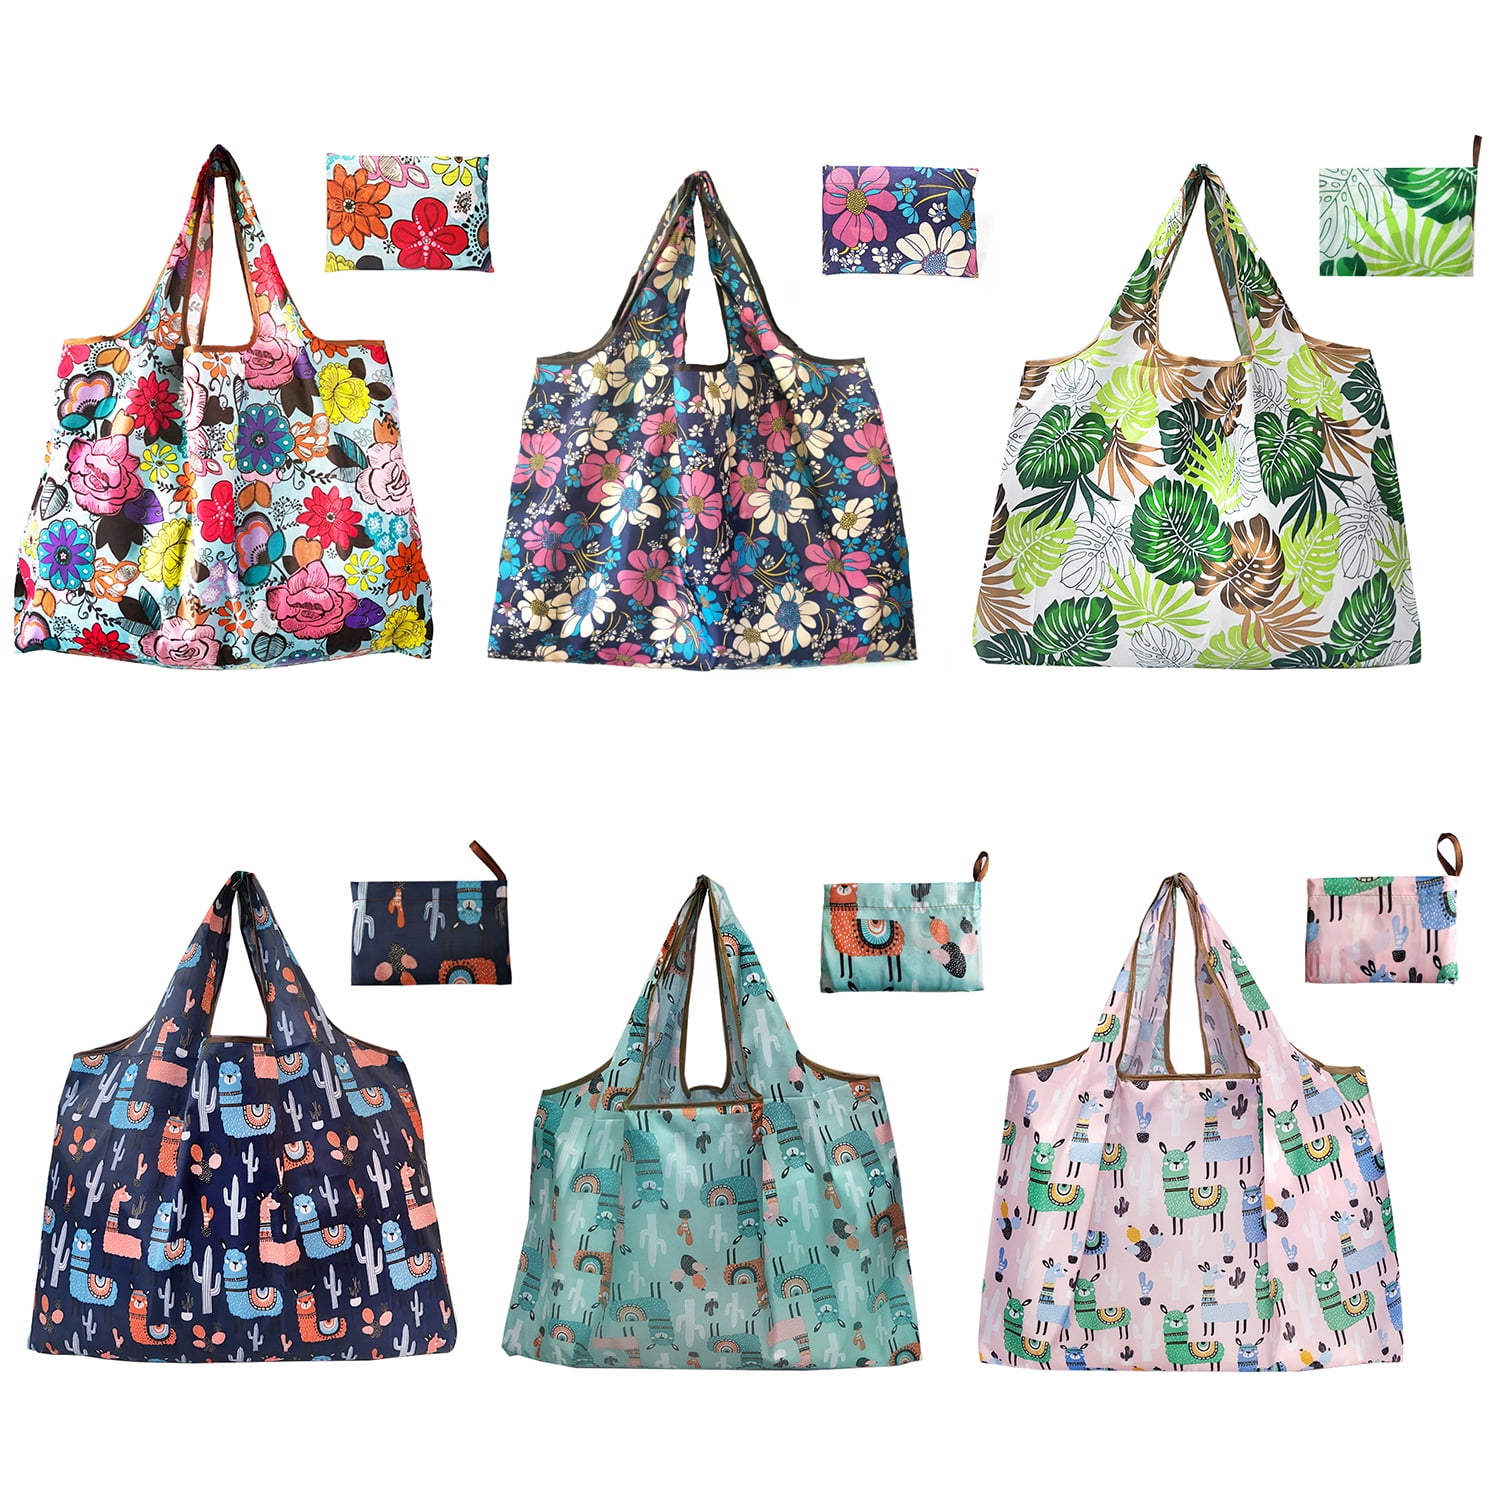 Foldable Shopping Bag Reusable Grocery Tote In Floral Tapestry Design 